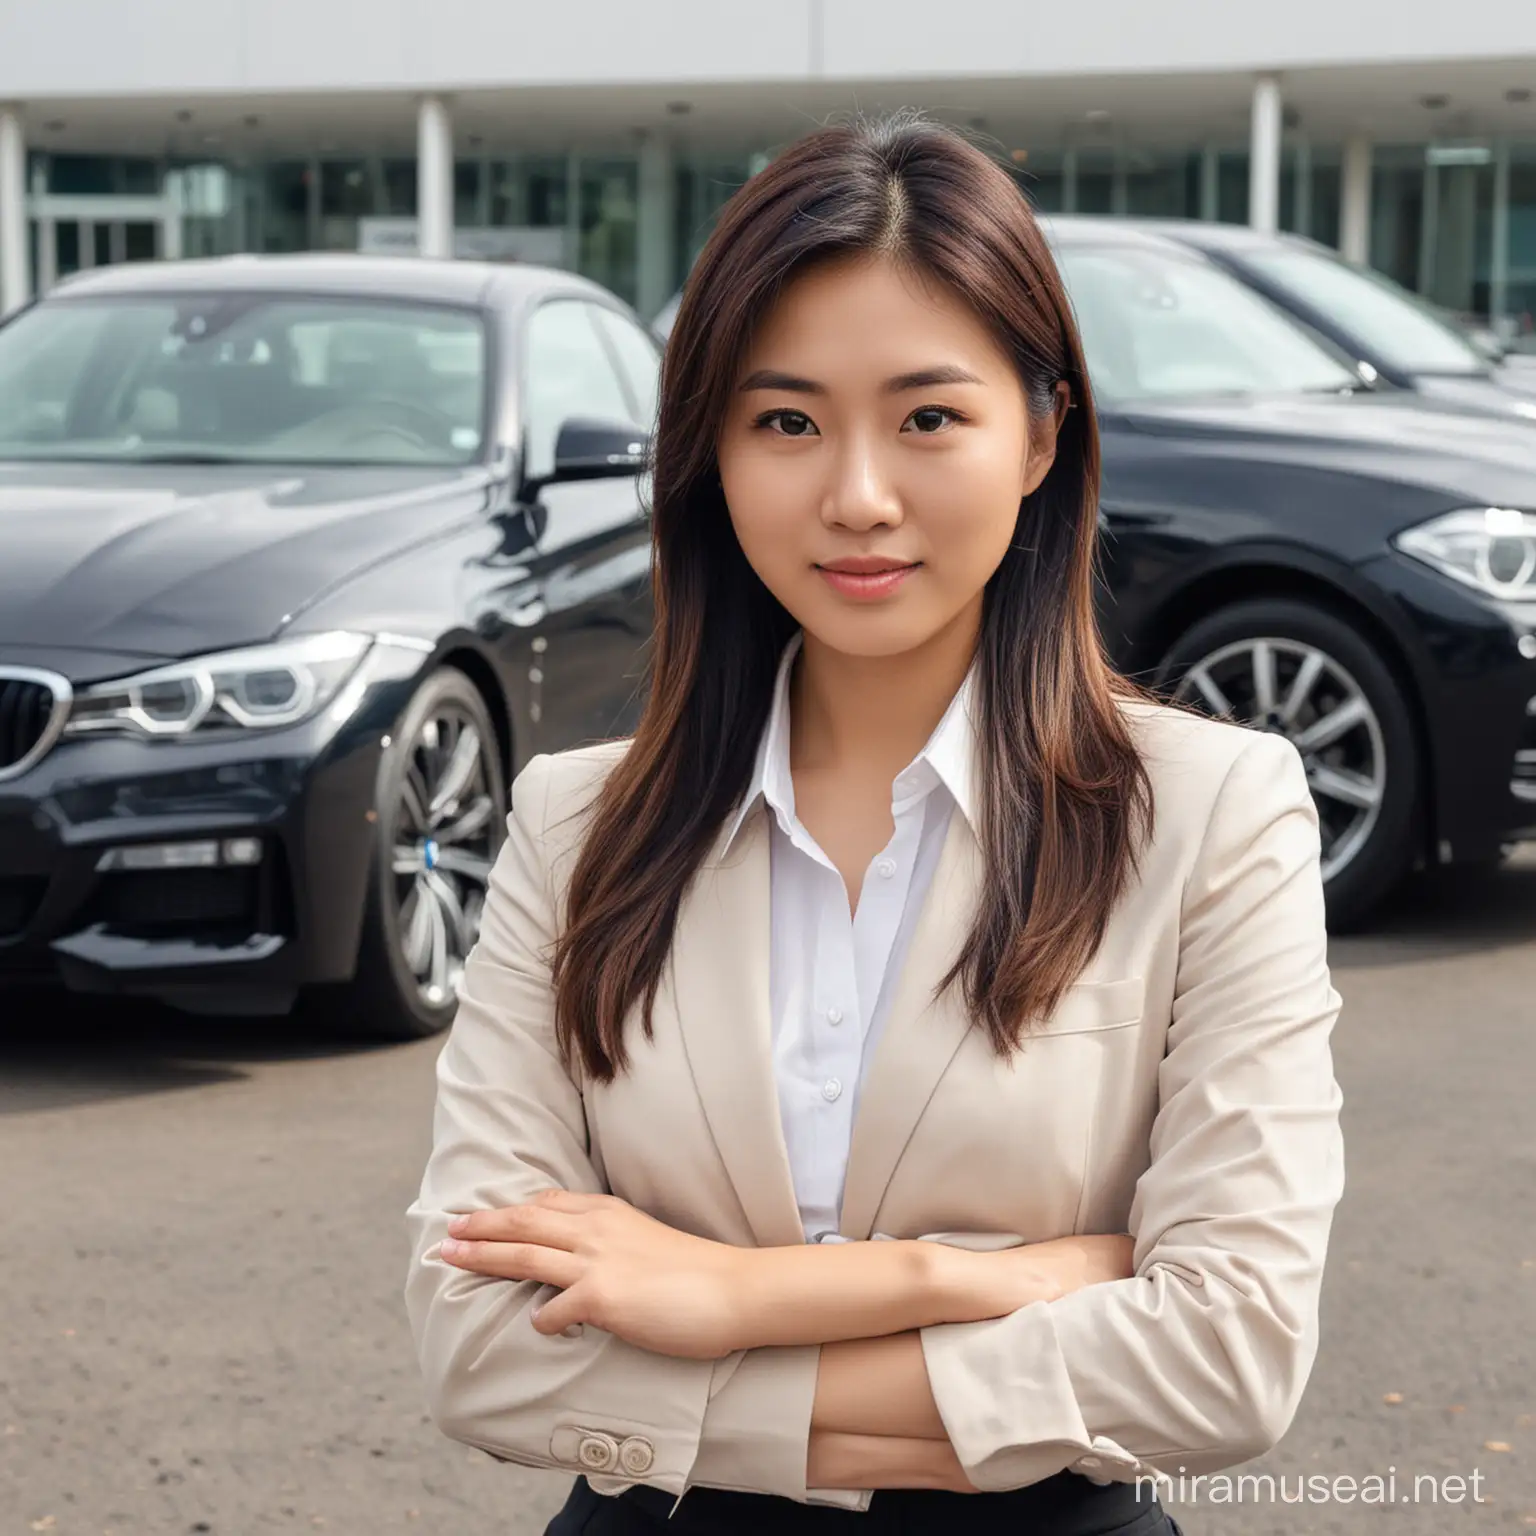 Young Asian Businesswoman with BMW Car